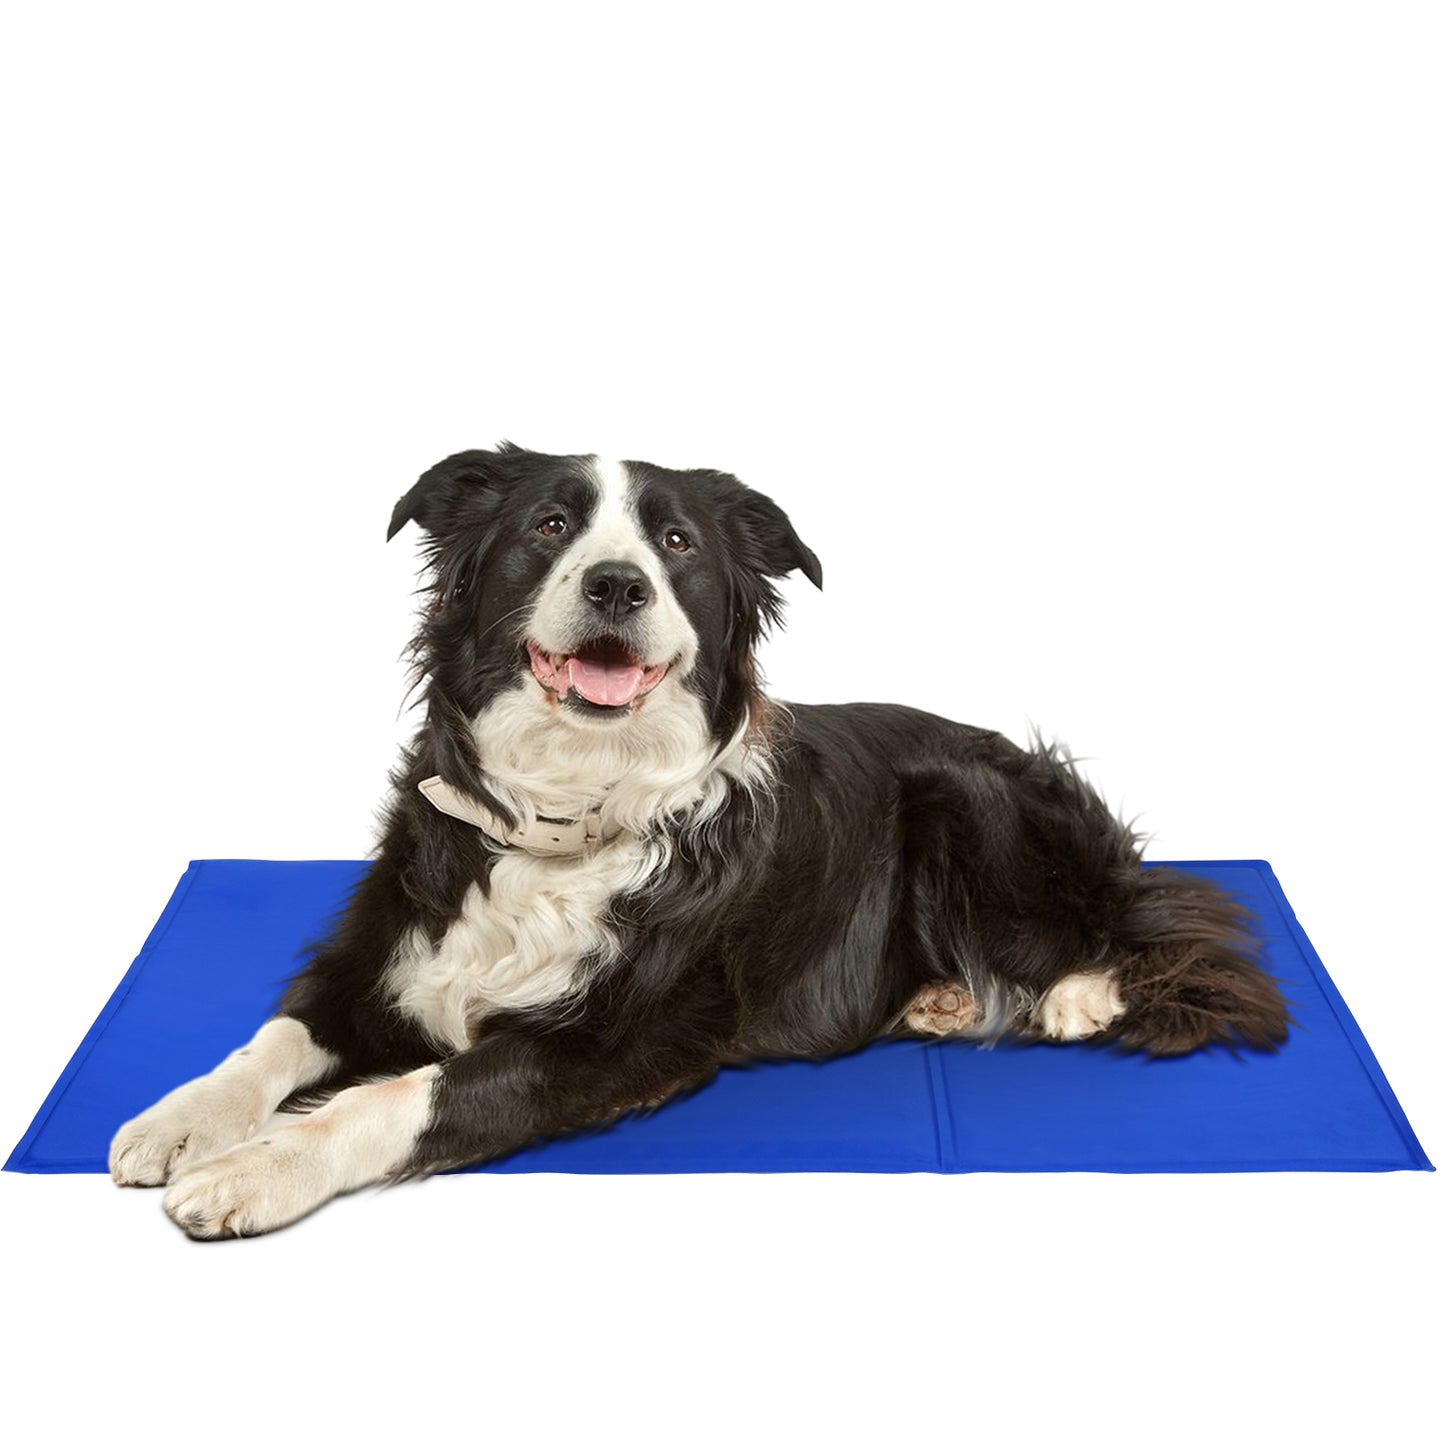 Zacro Dog Cooling Mat 39"x 28" - Pressure Activated Self Cooling Pad for Dogs Cats, 3 Hour Gel Cooling Dog Bed Mats for Crate, Home, Travel, Large